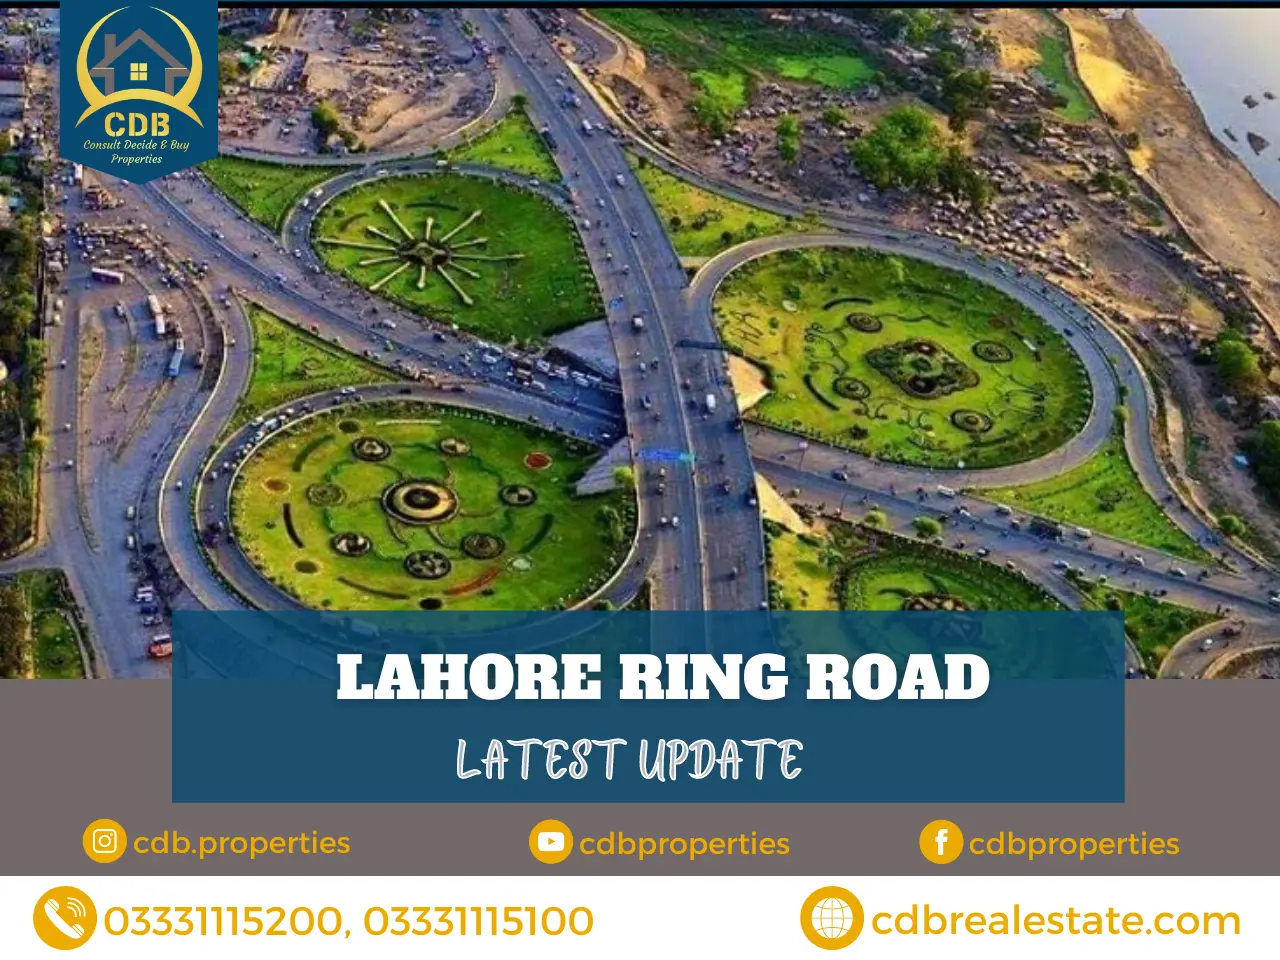 drone view of lahore ring road